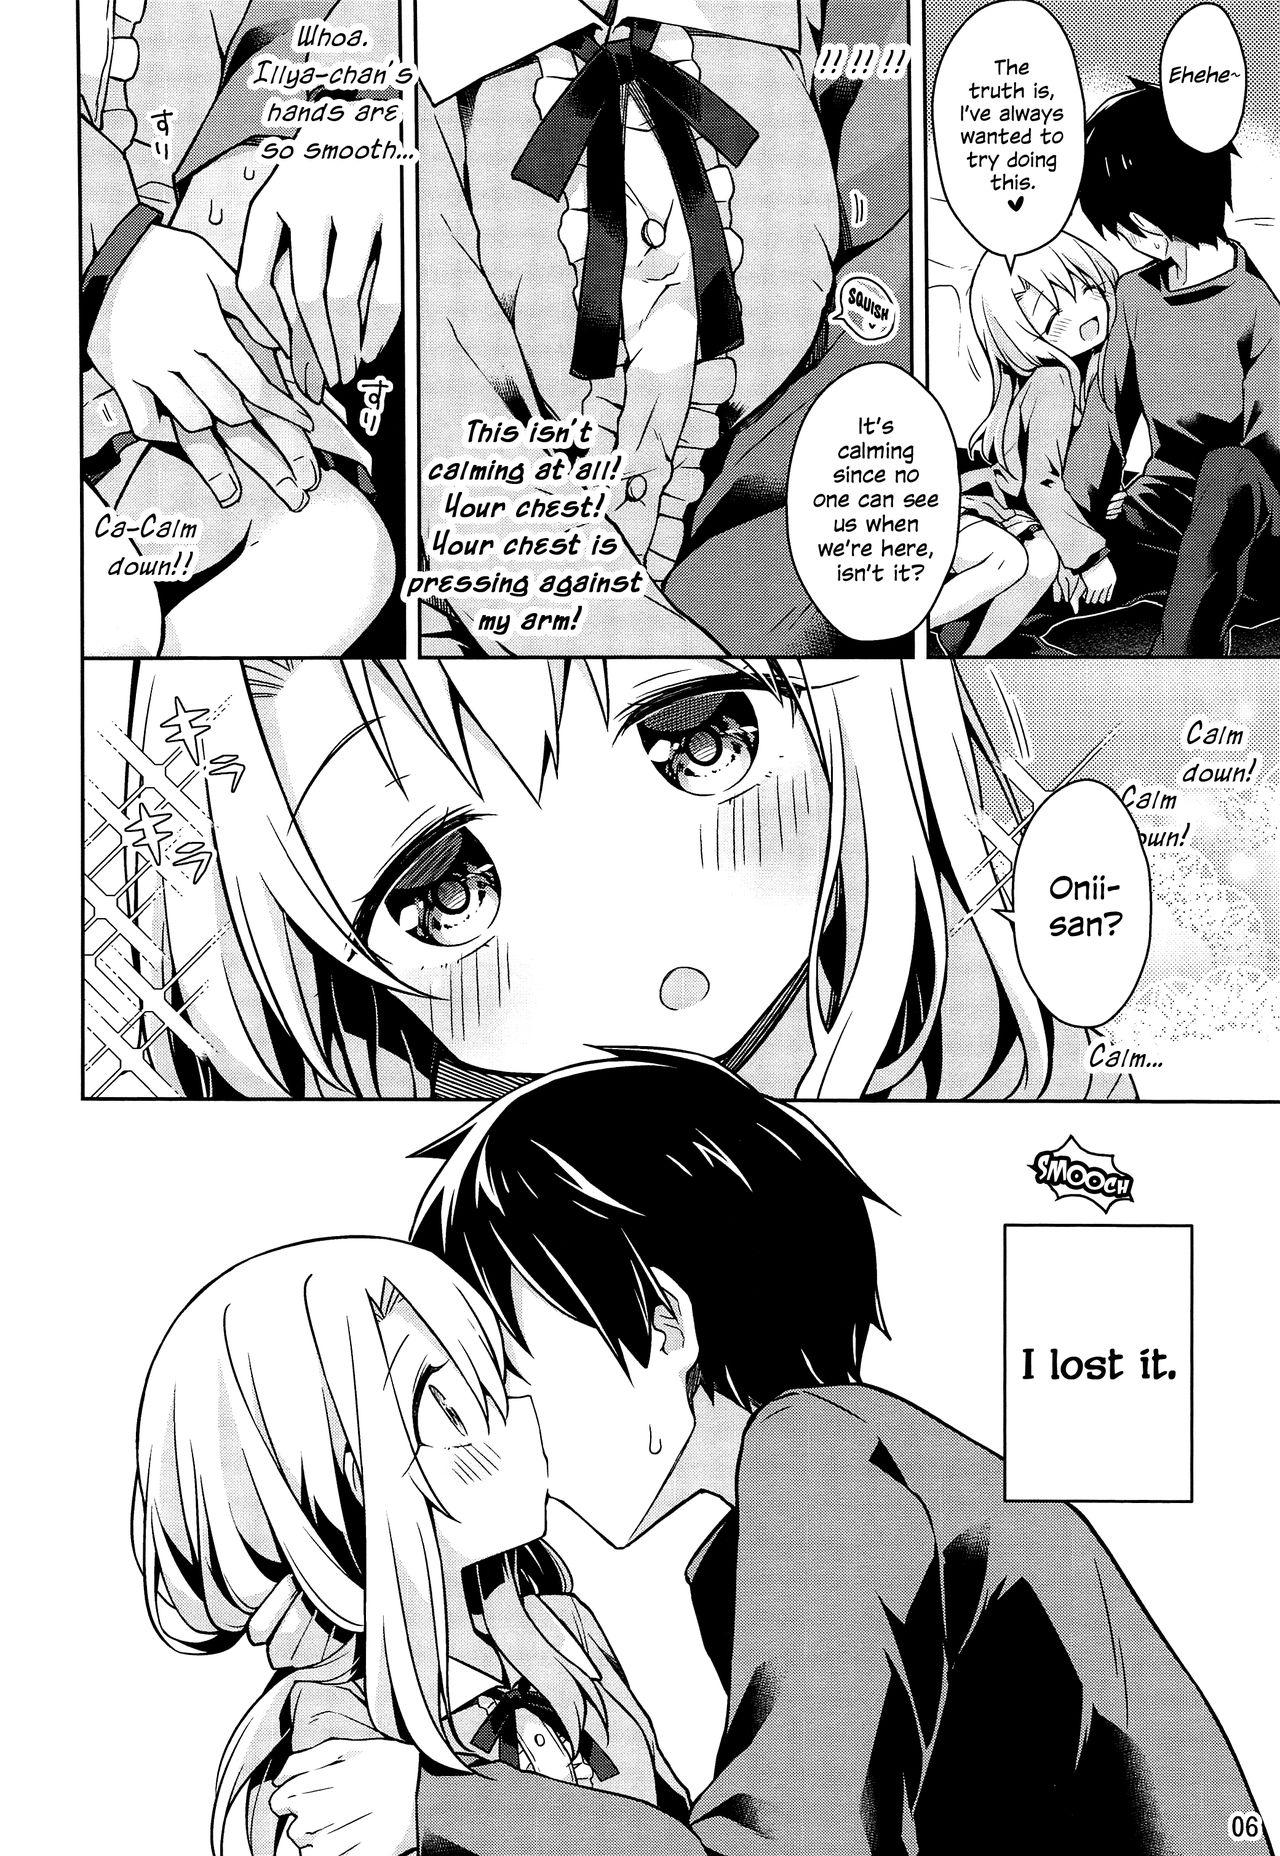 Tgirl Illya to Ouchi de Ecchi Shitai!! | I Want To Make Love With Illya At My Place!! - Fate kaleid liner prisma illya Ass To Mouth - Page 7